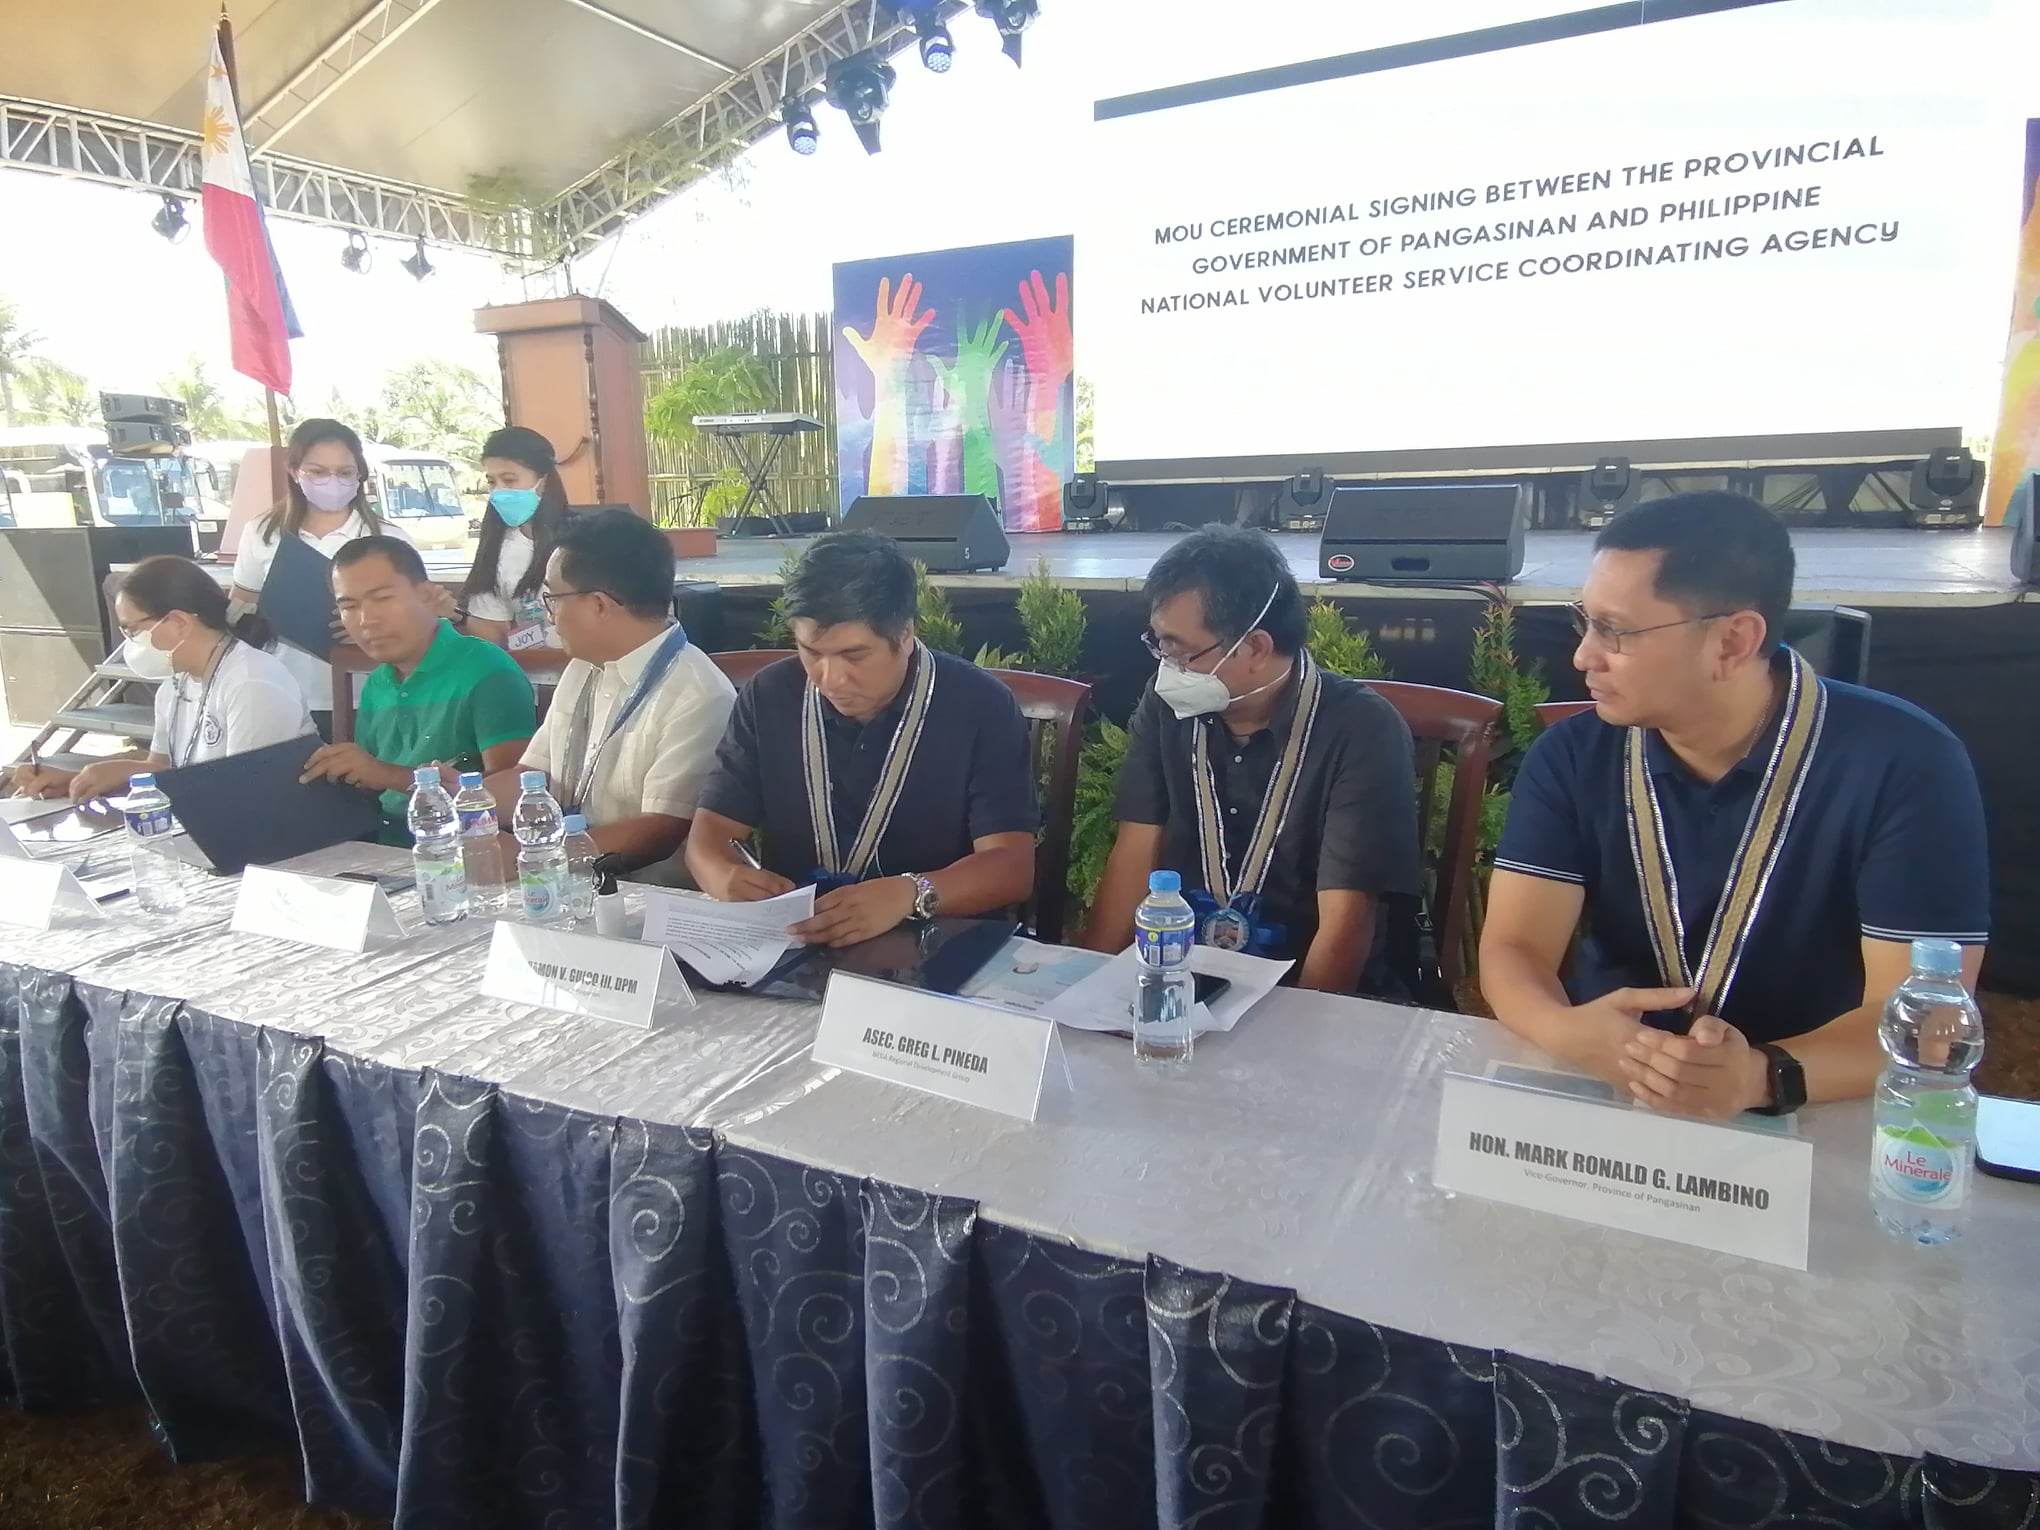 Pangasinan officials sign a memorandum of understanding with representatives of the Philippine National Volunteer Service Coordinating Agency for the establishment of Pangasinan Volunteerism Center in Lingayen town on Thursday, Dec. 1